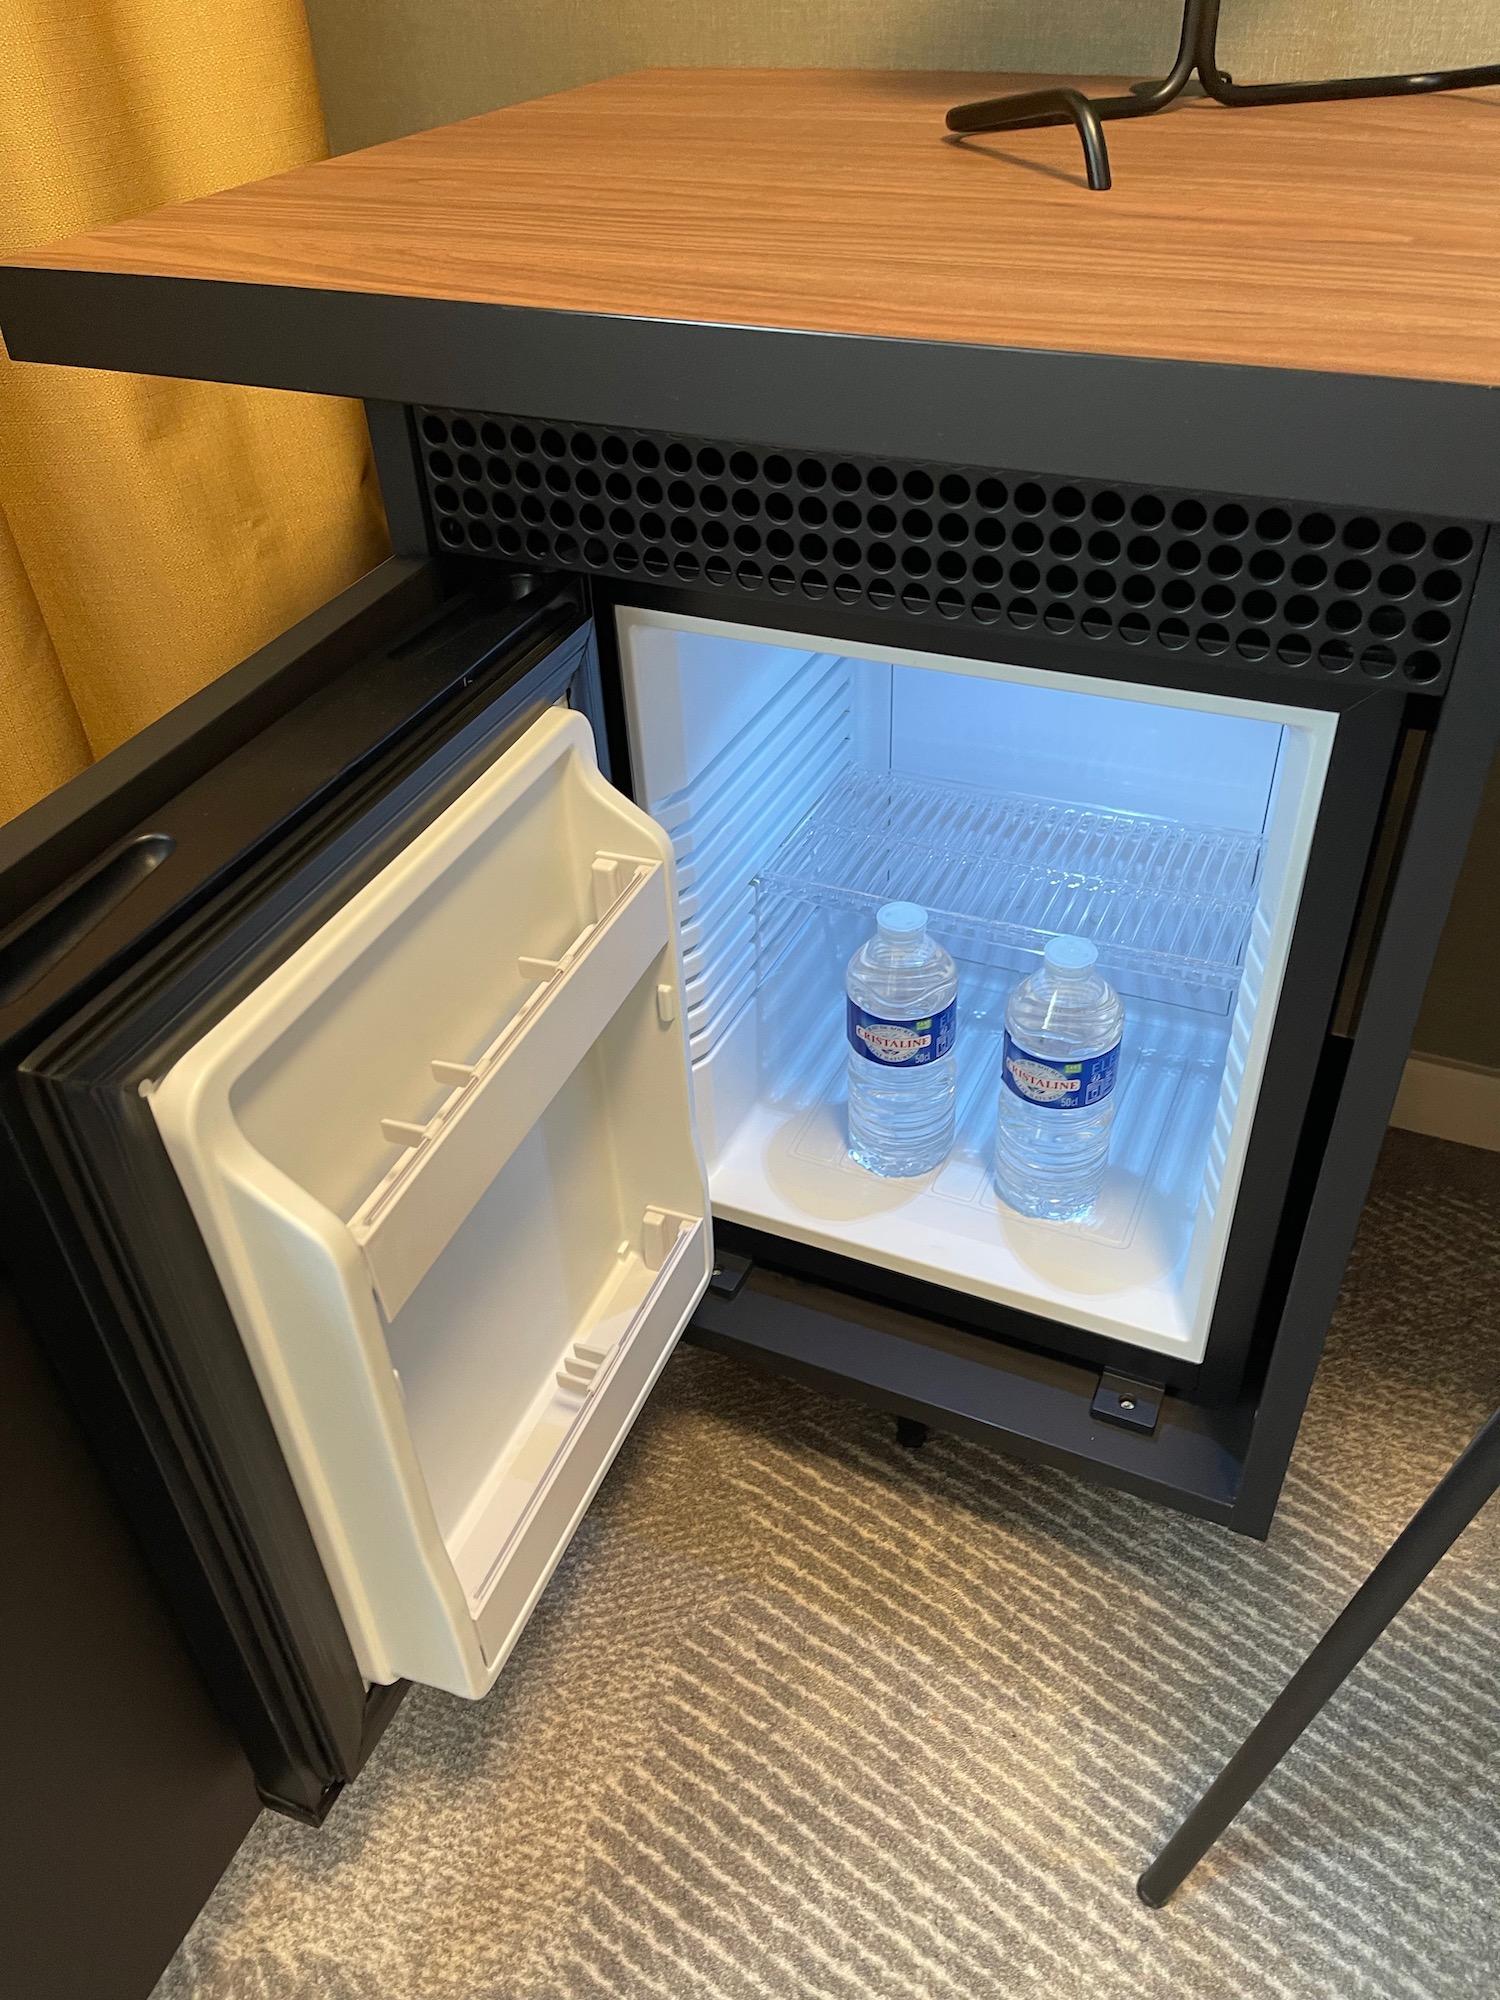 a small refrigerator with two bottles of water inside